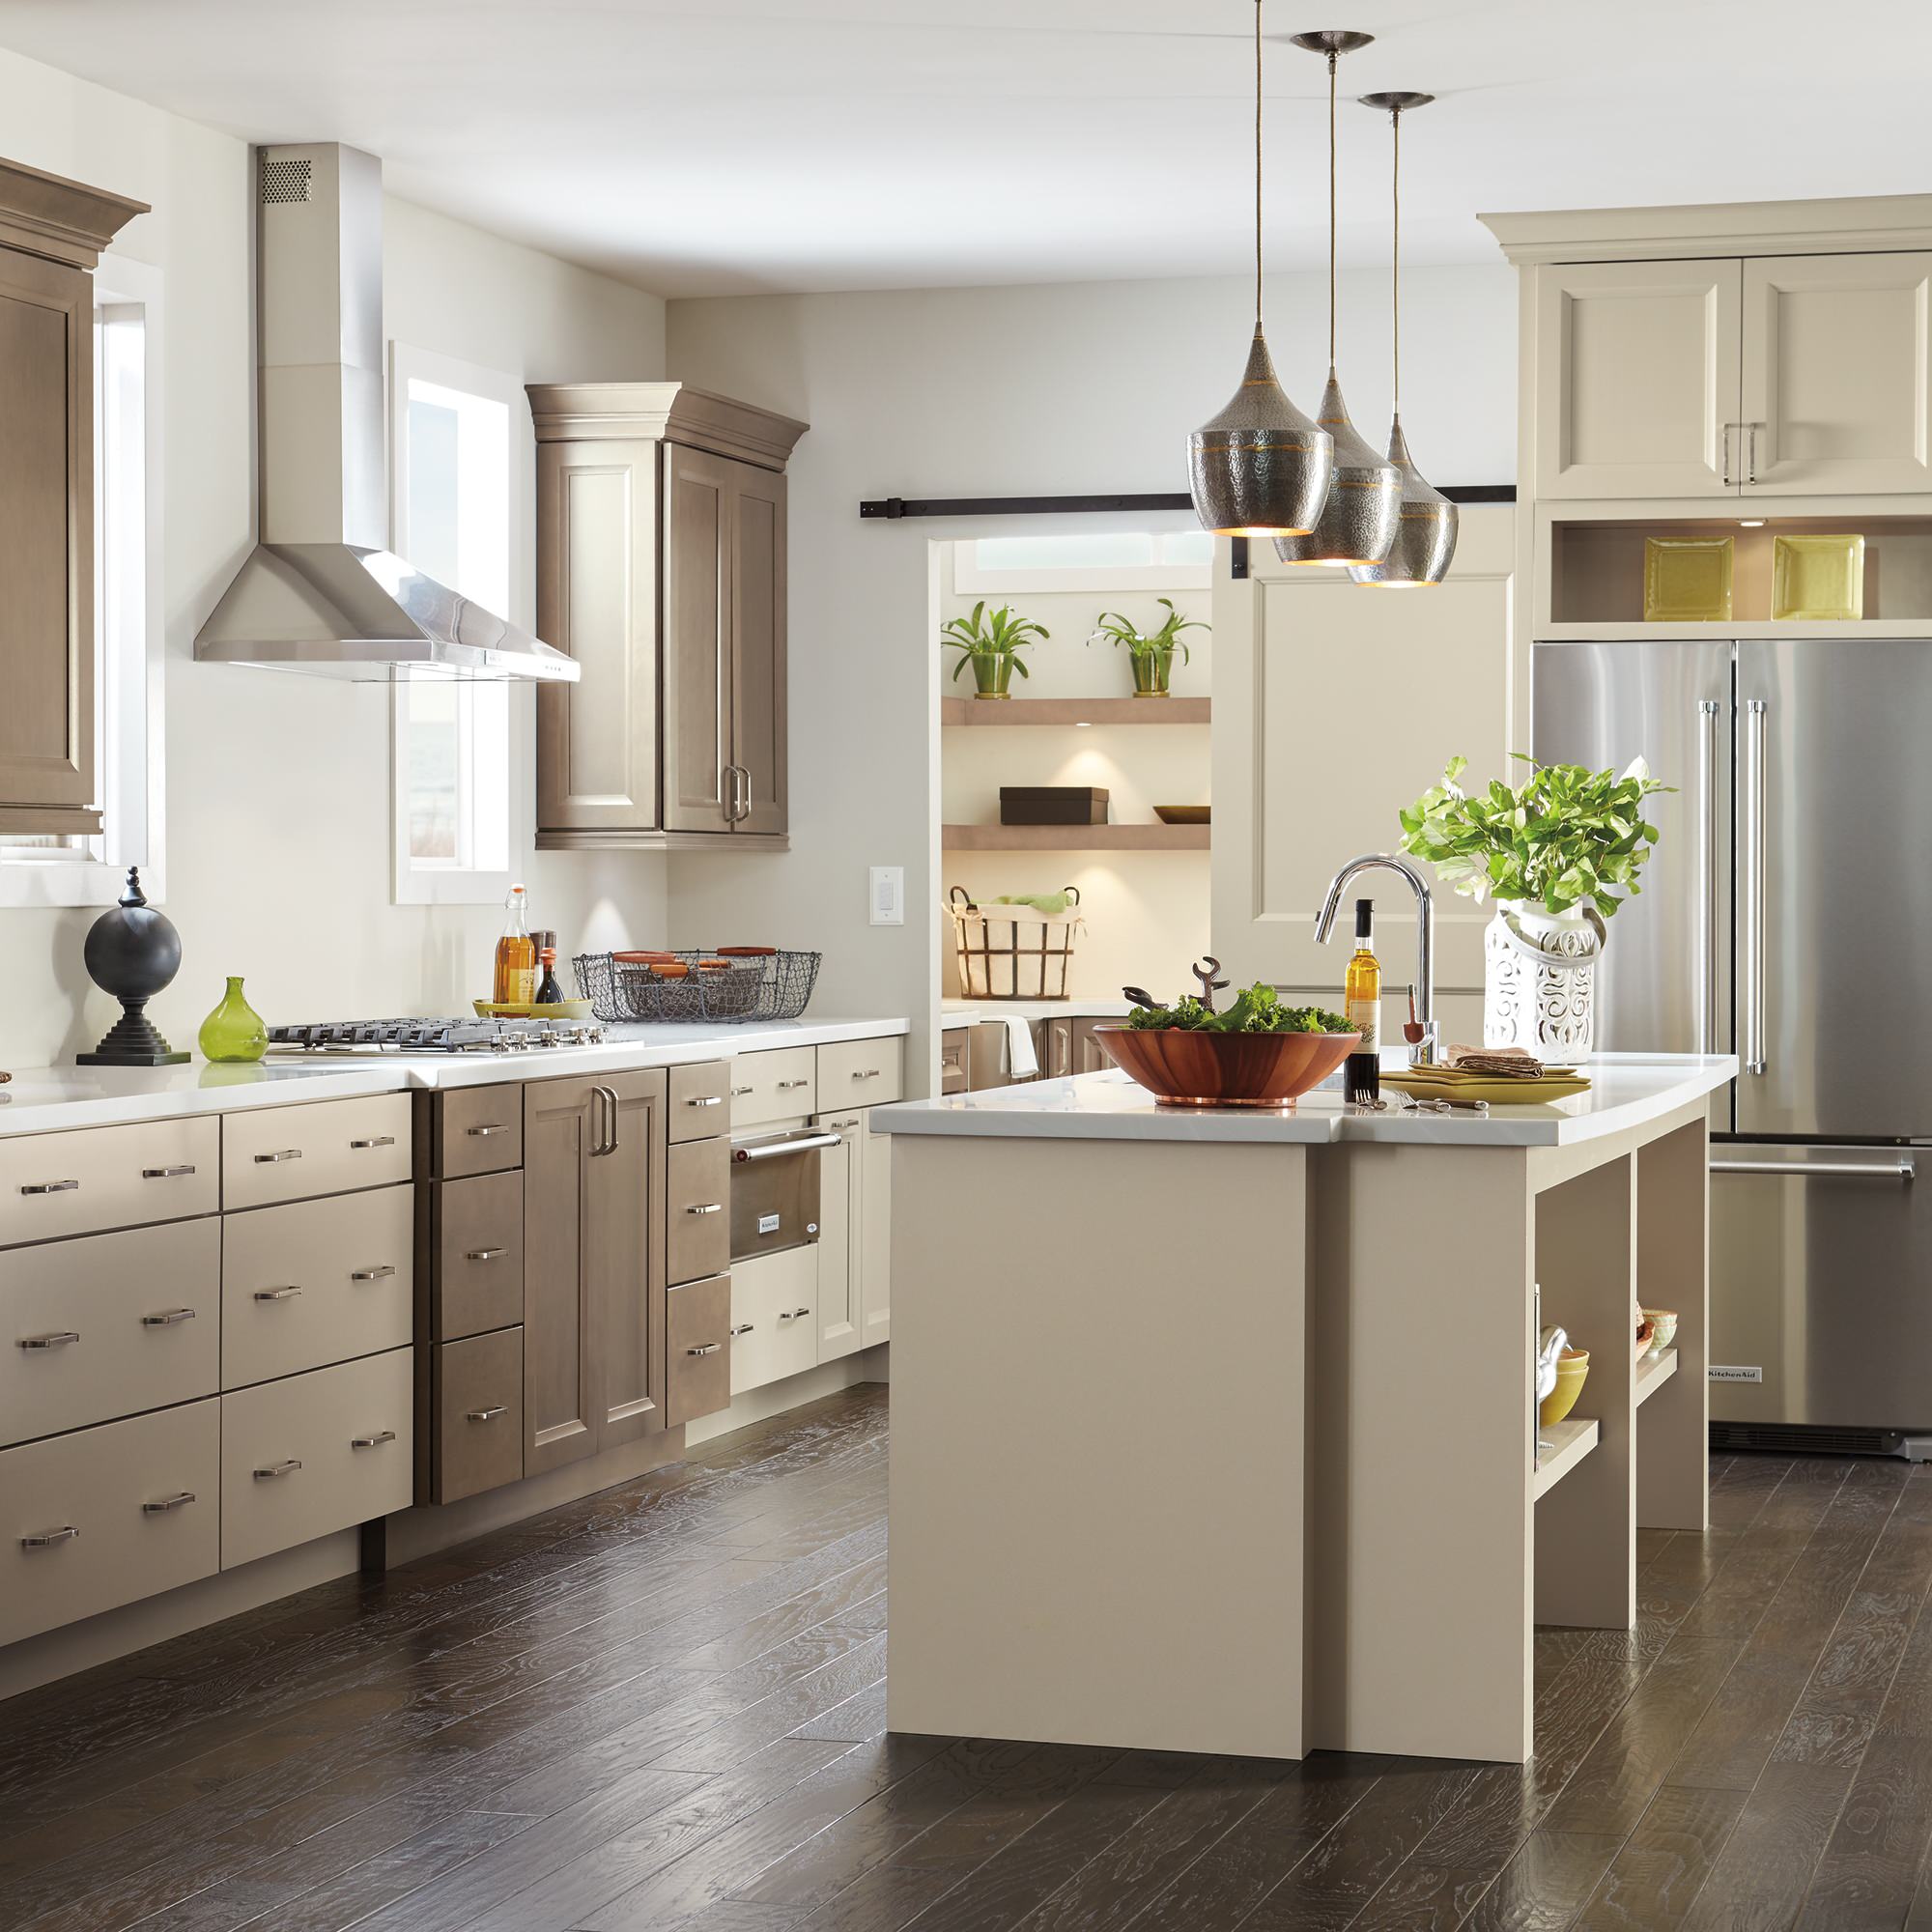 Kemper Cabinets Two Tone Kitchen With Maple Cabinets Masterbrand Cabinets Inc Img~3e7124bb0c4084fa 14 0933 1 50fbfb9 